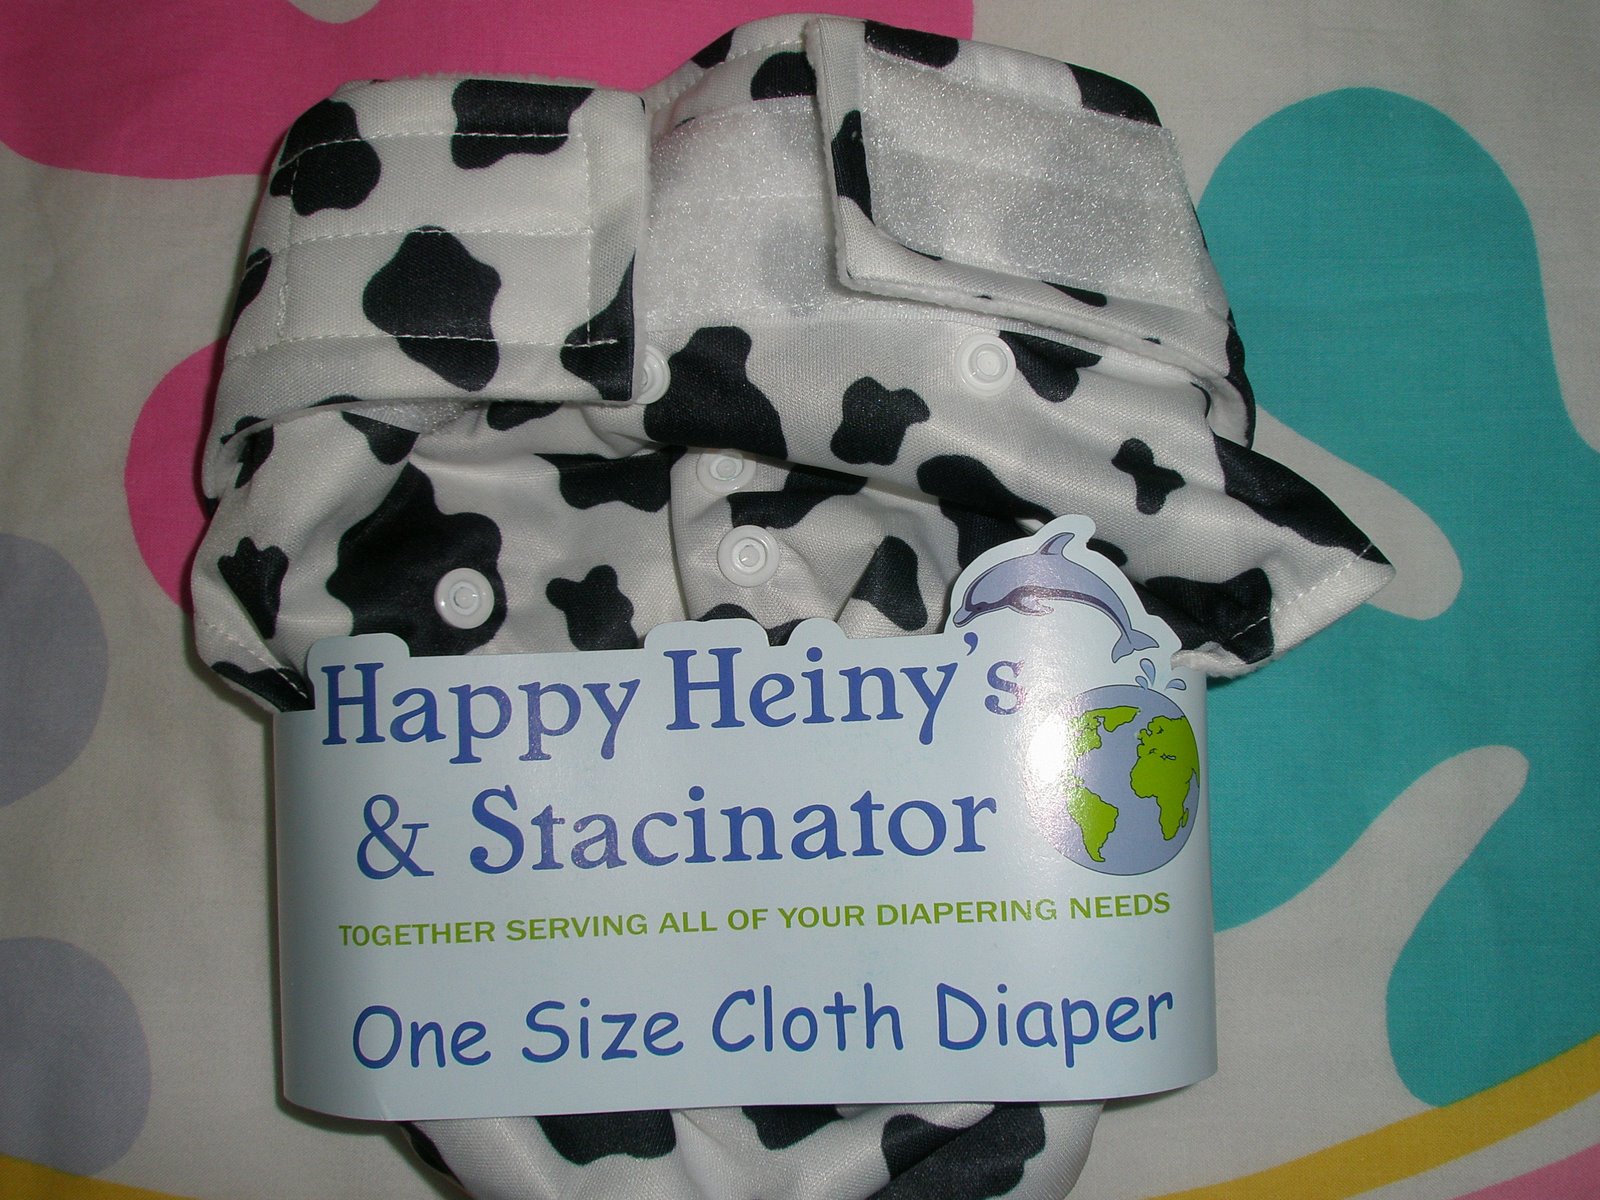 [New+cloth+diapers,+Sher+eating+chick+feet+030.jpg]